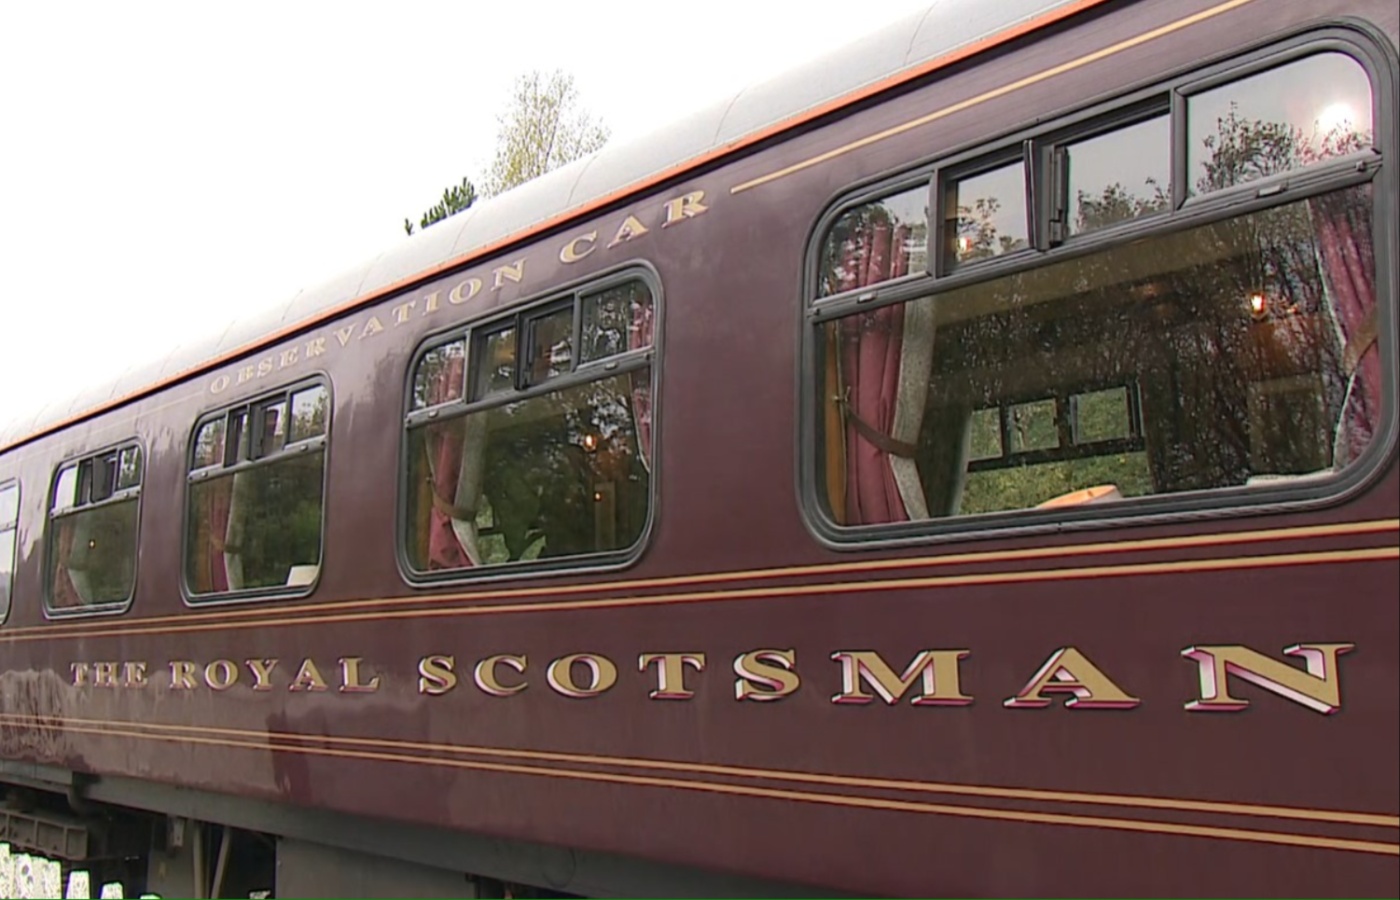 Flying Scotsman was scheduled to be running trips this weekend, with the line expected to be especially busy.